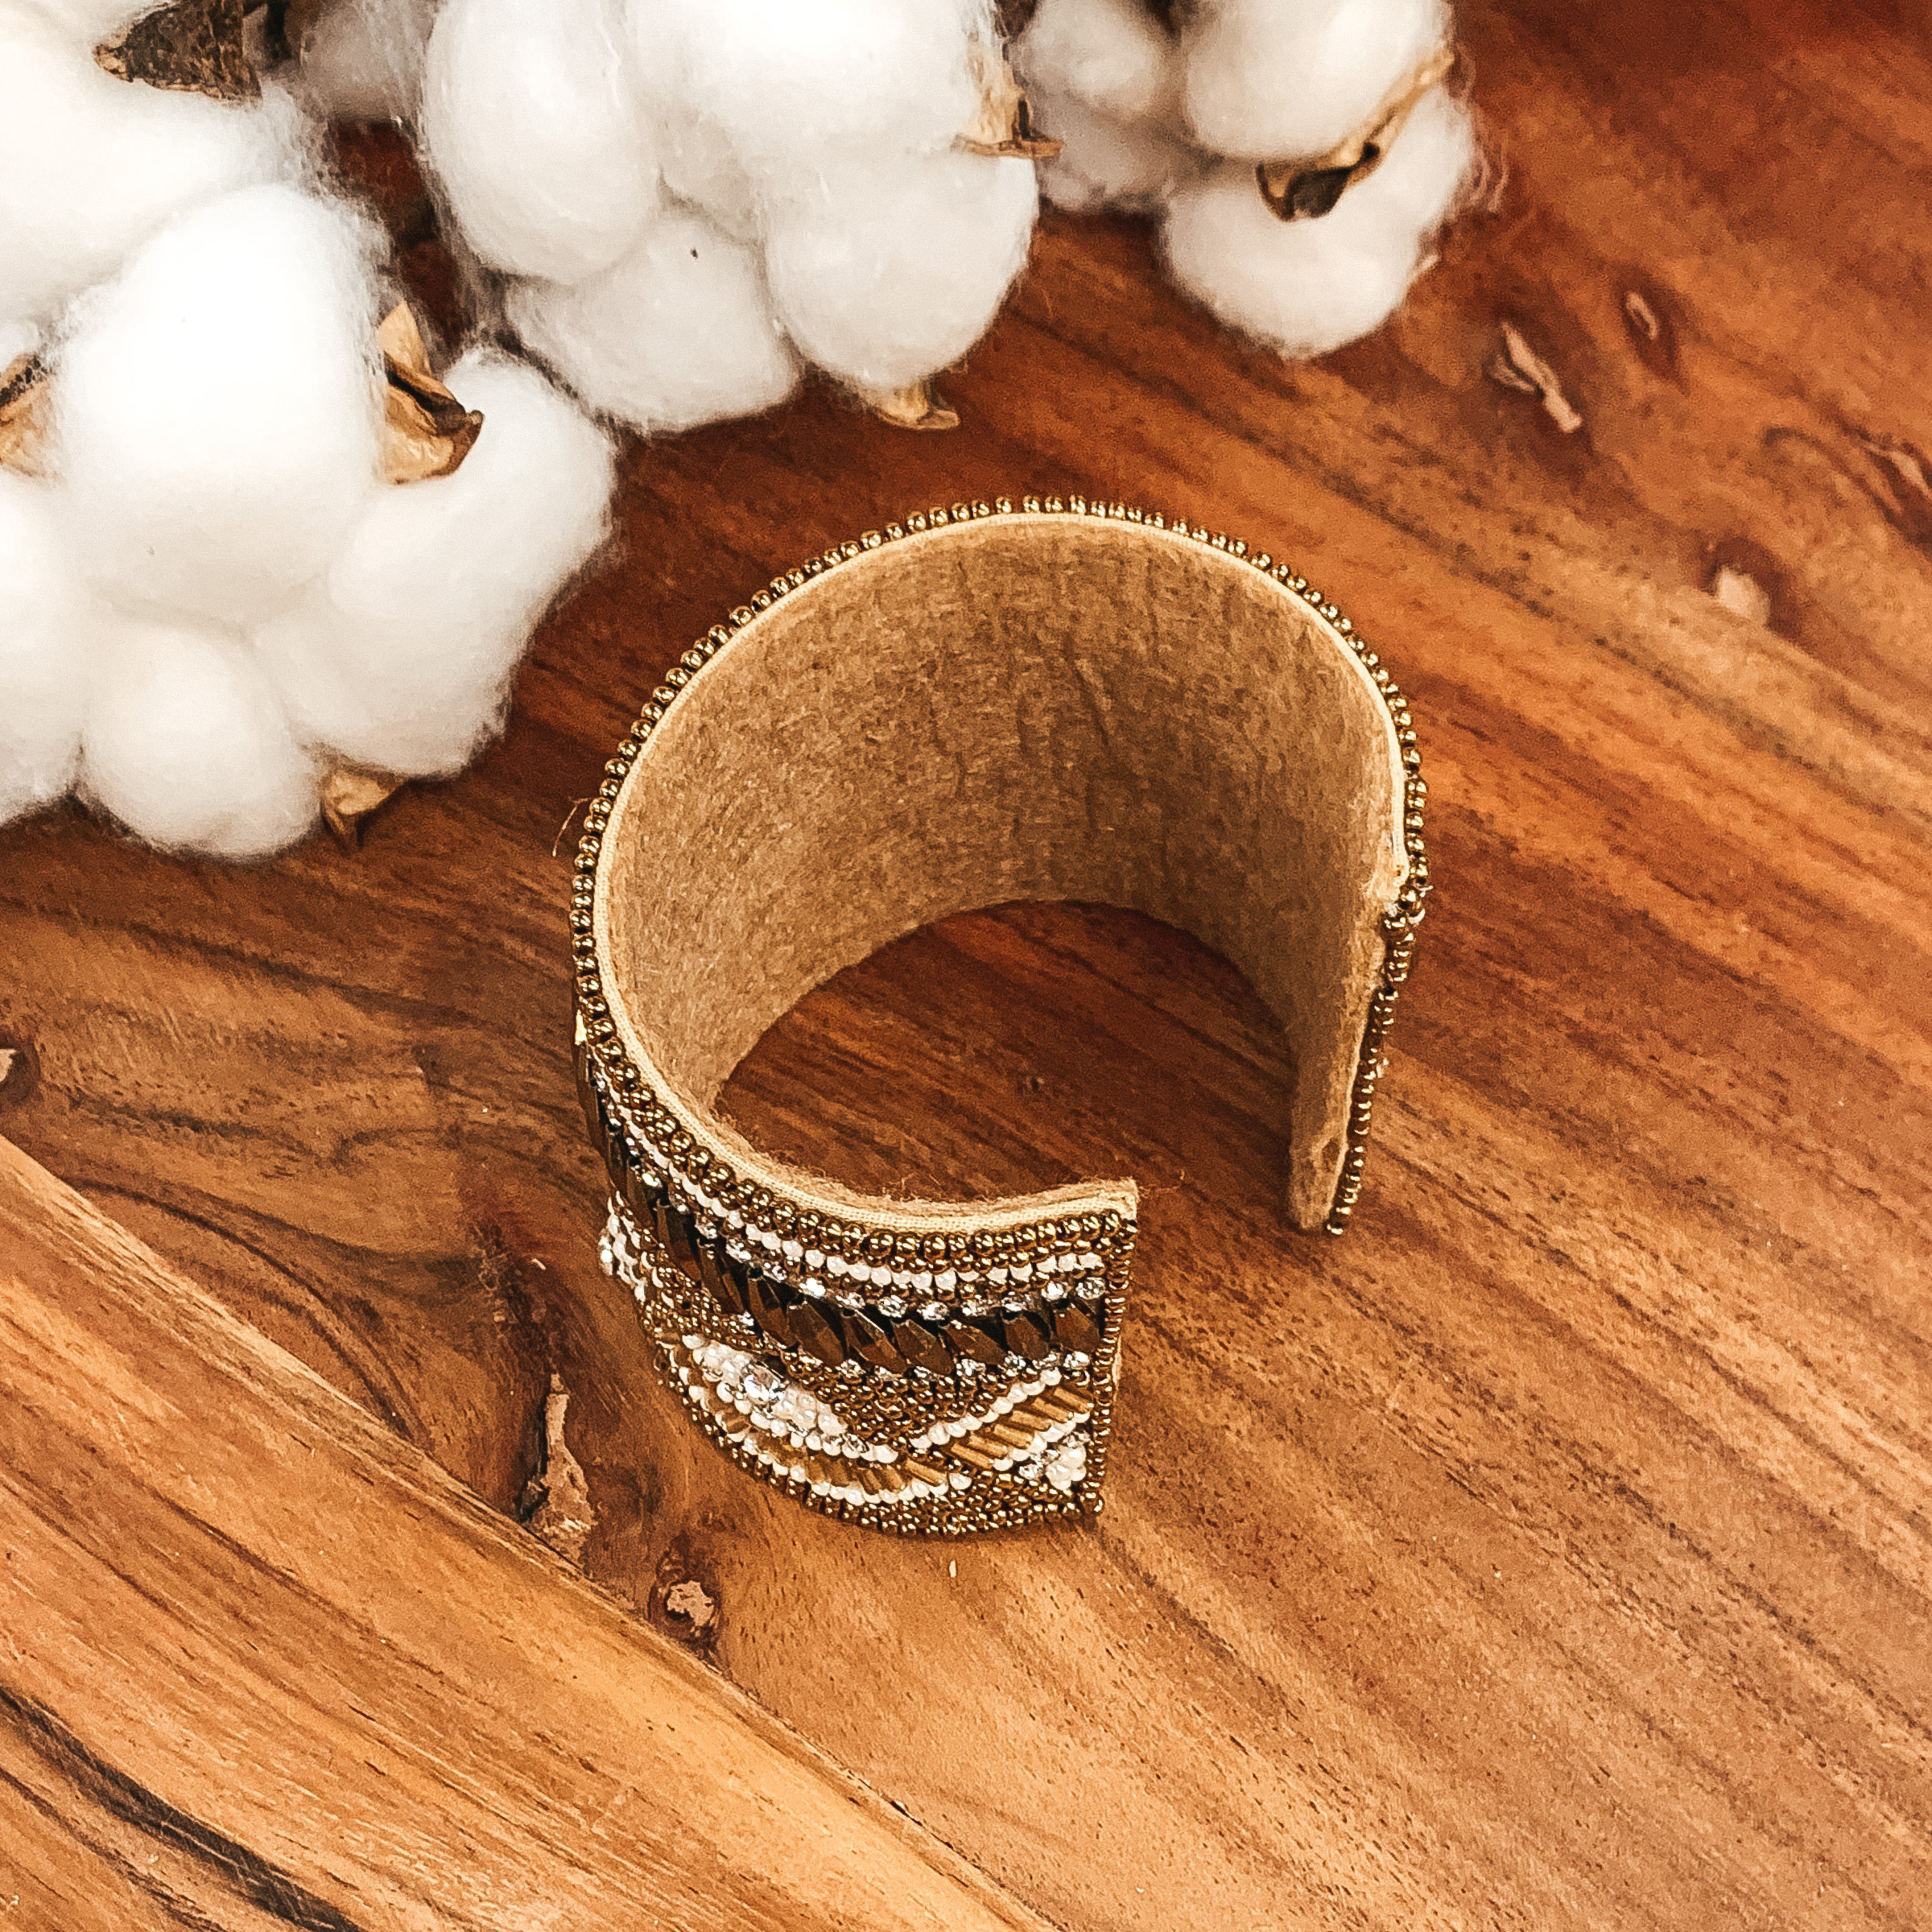 Bali Bound Beaded Bracelet in Tan - Giddy Up Glamour Boutique